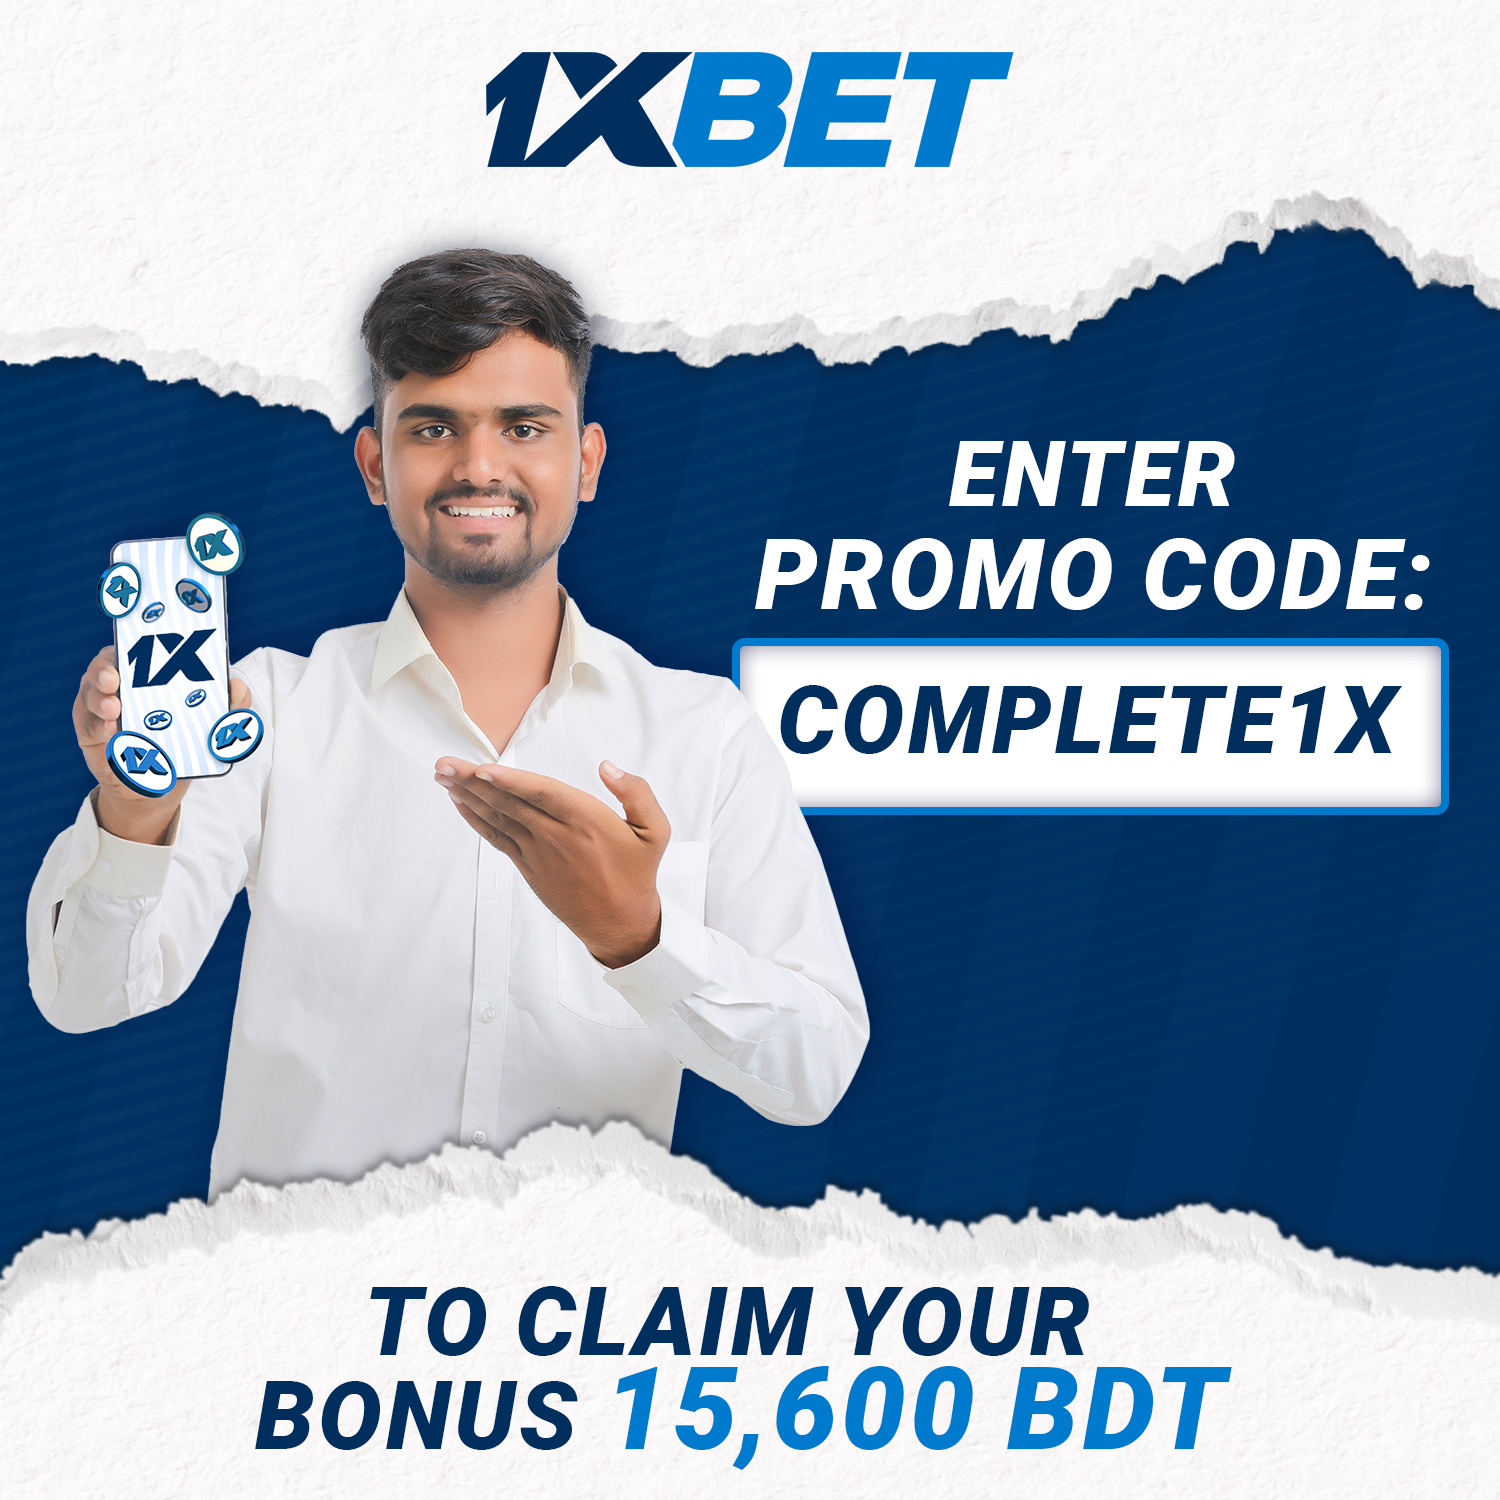 1xBet App Bangladesh: Download the latest for Android & iOS version